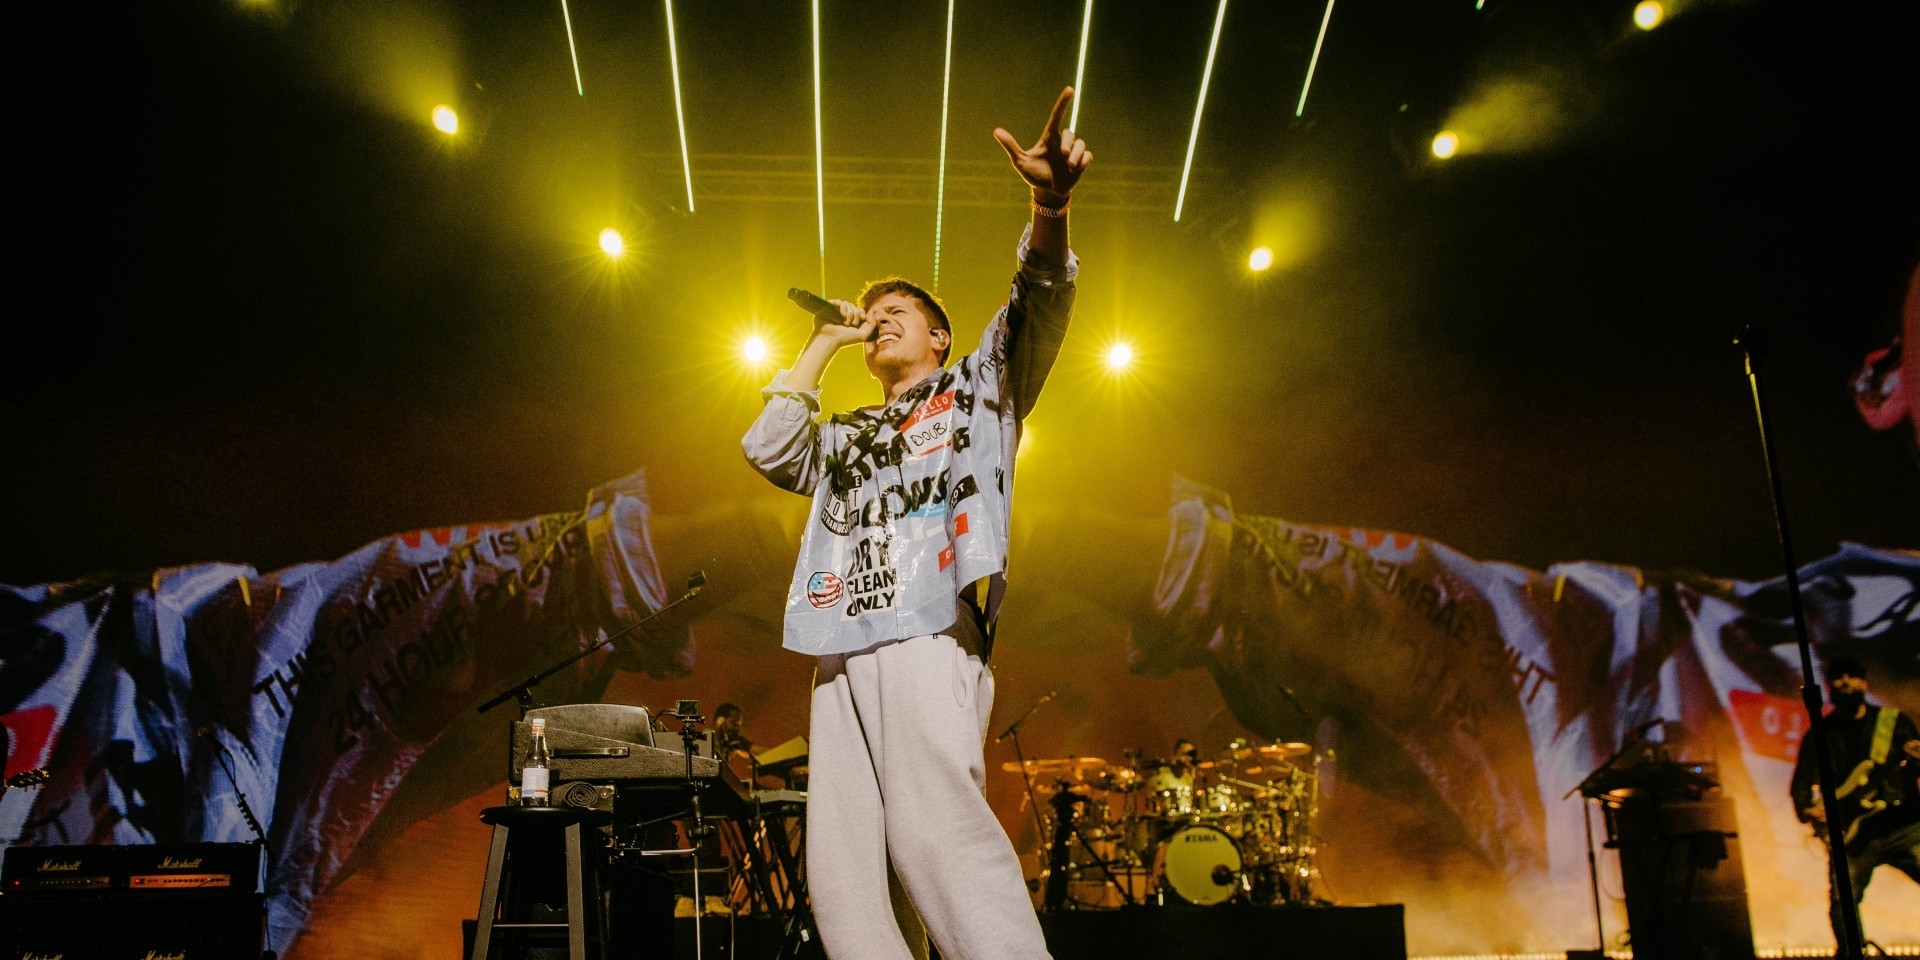 Charlie Puth charms Singapore yet again – photo gallery